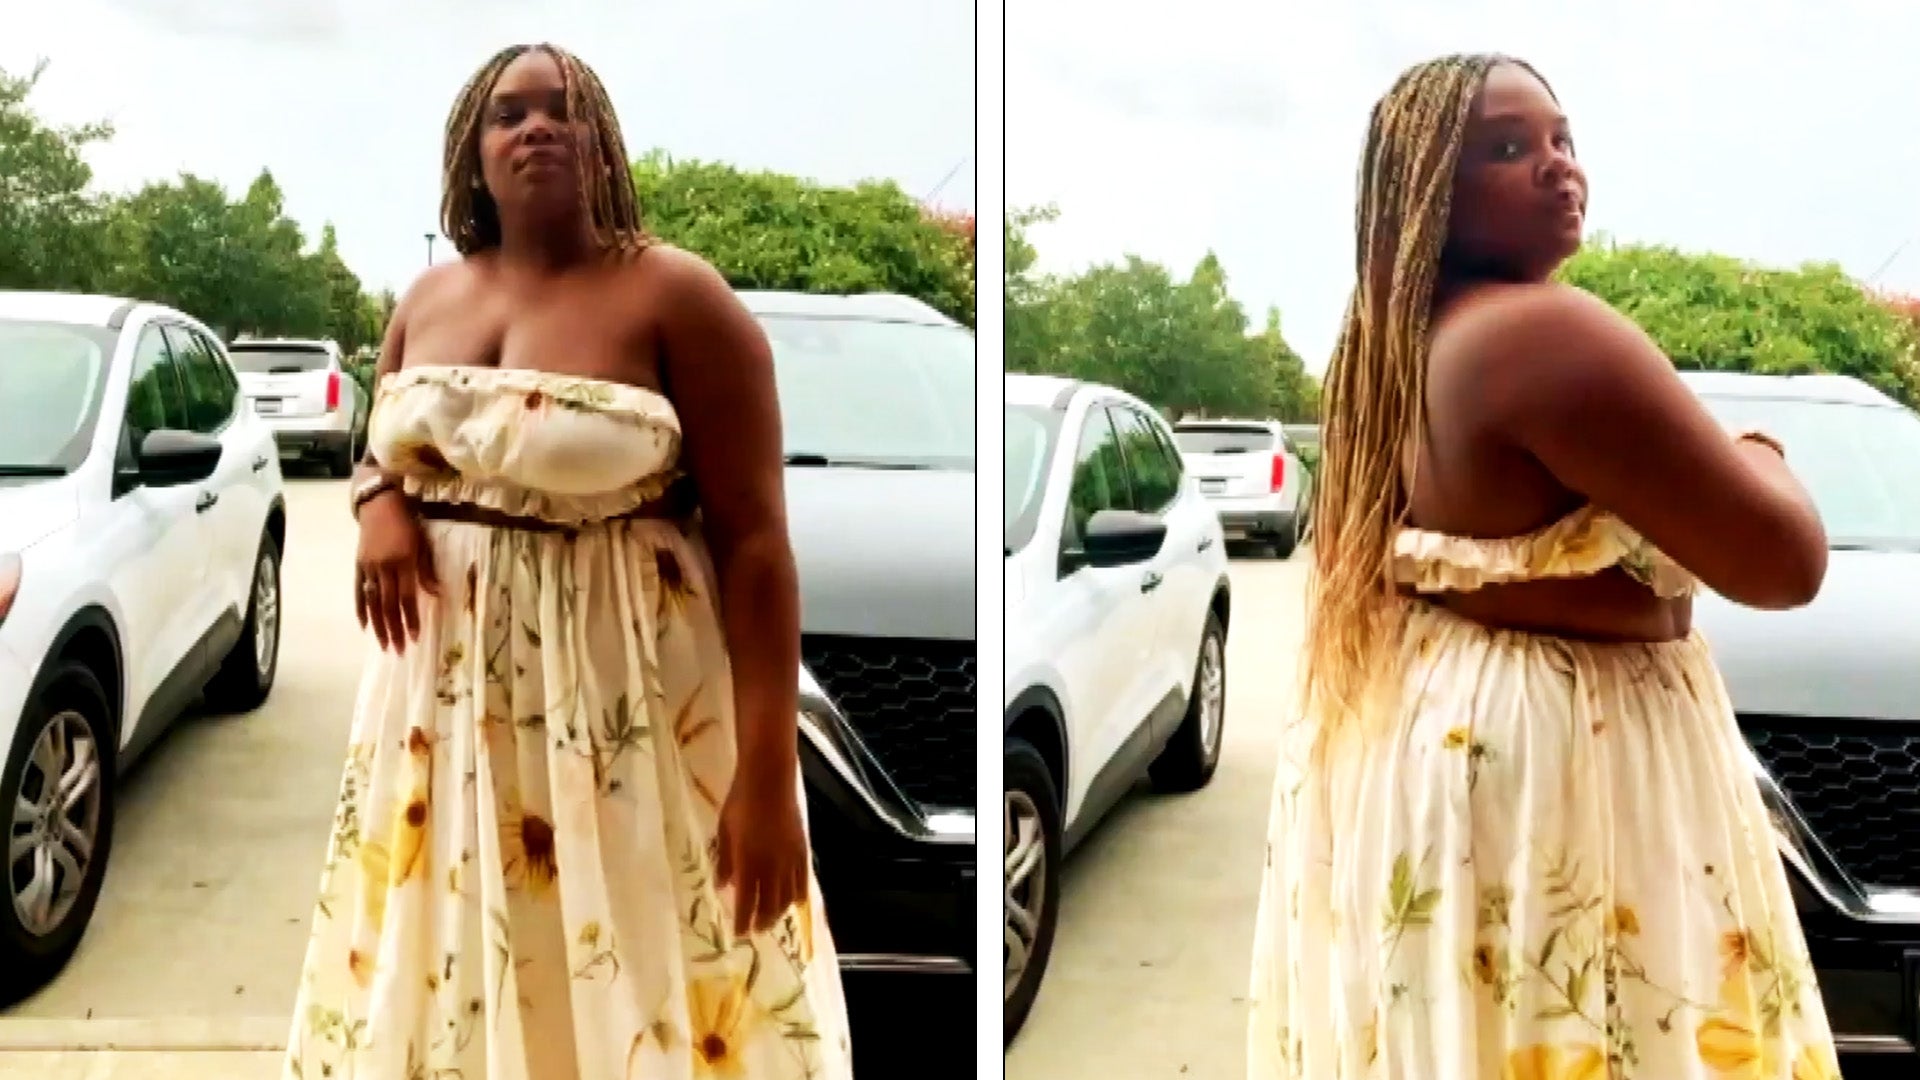 Louisiana Woman Kicked Out of Steakhouse for Allegedly Wearing 'Inappropriate Attire'